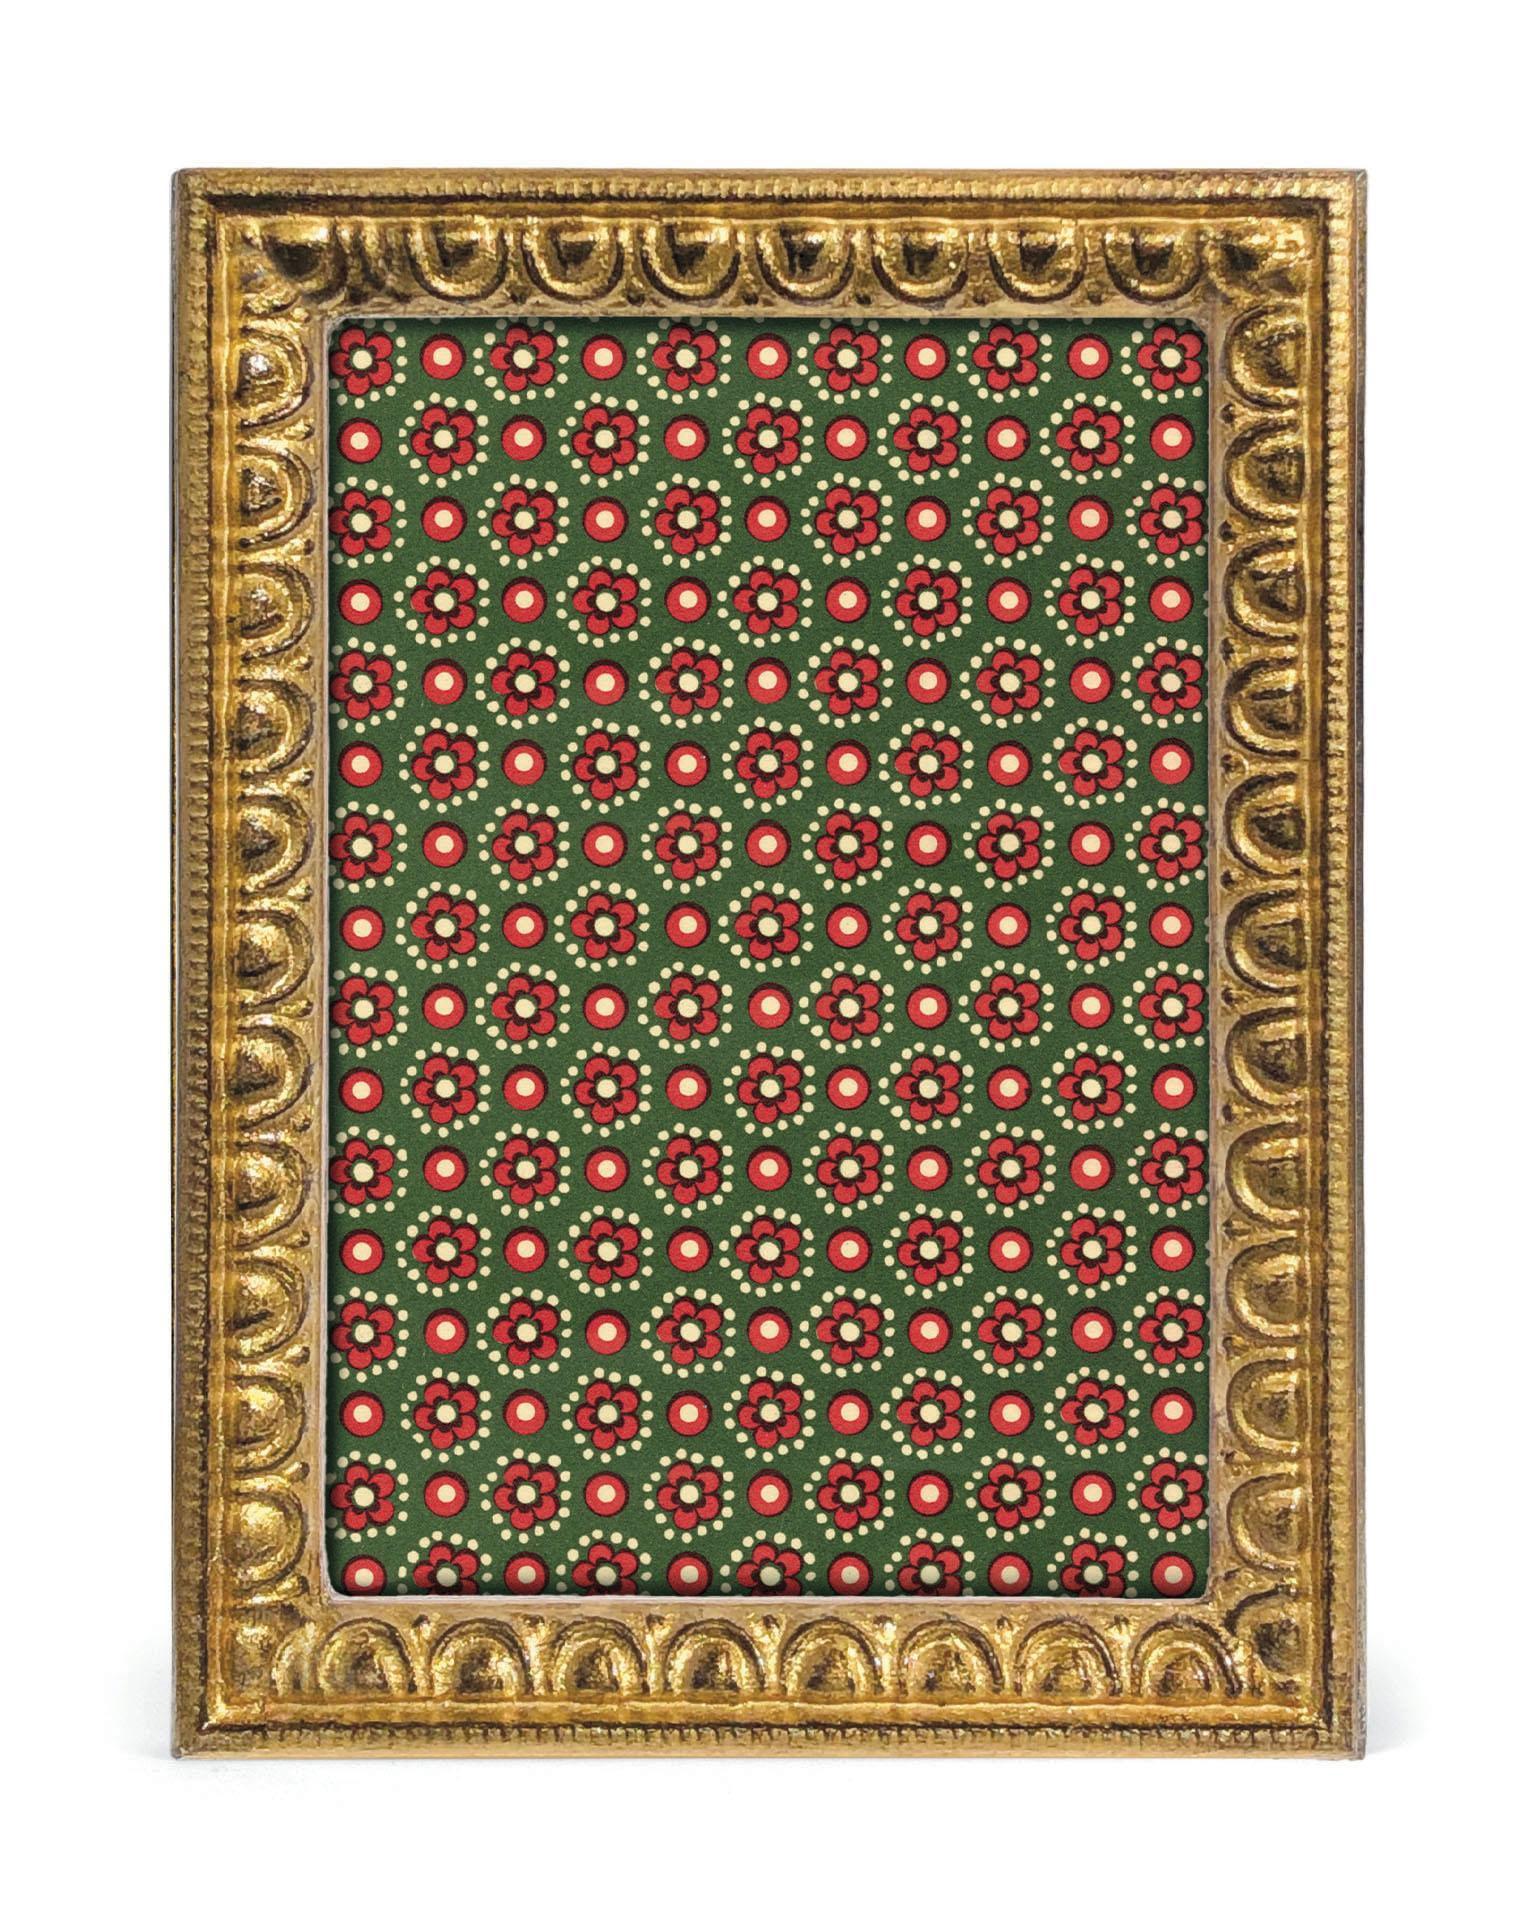 Cavallini & Co. 4 by 6 Inch Umbria Gold Florentine Frame